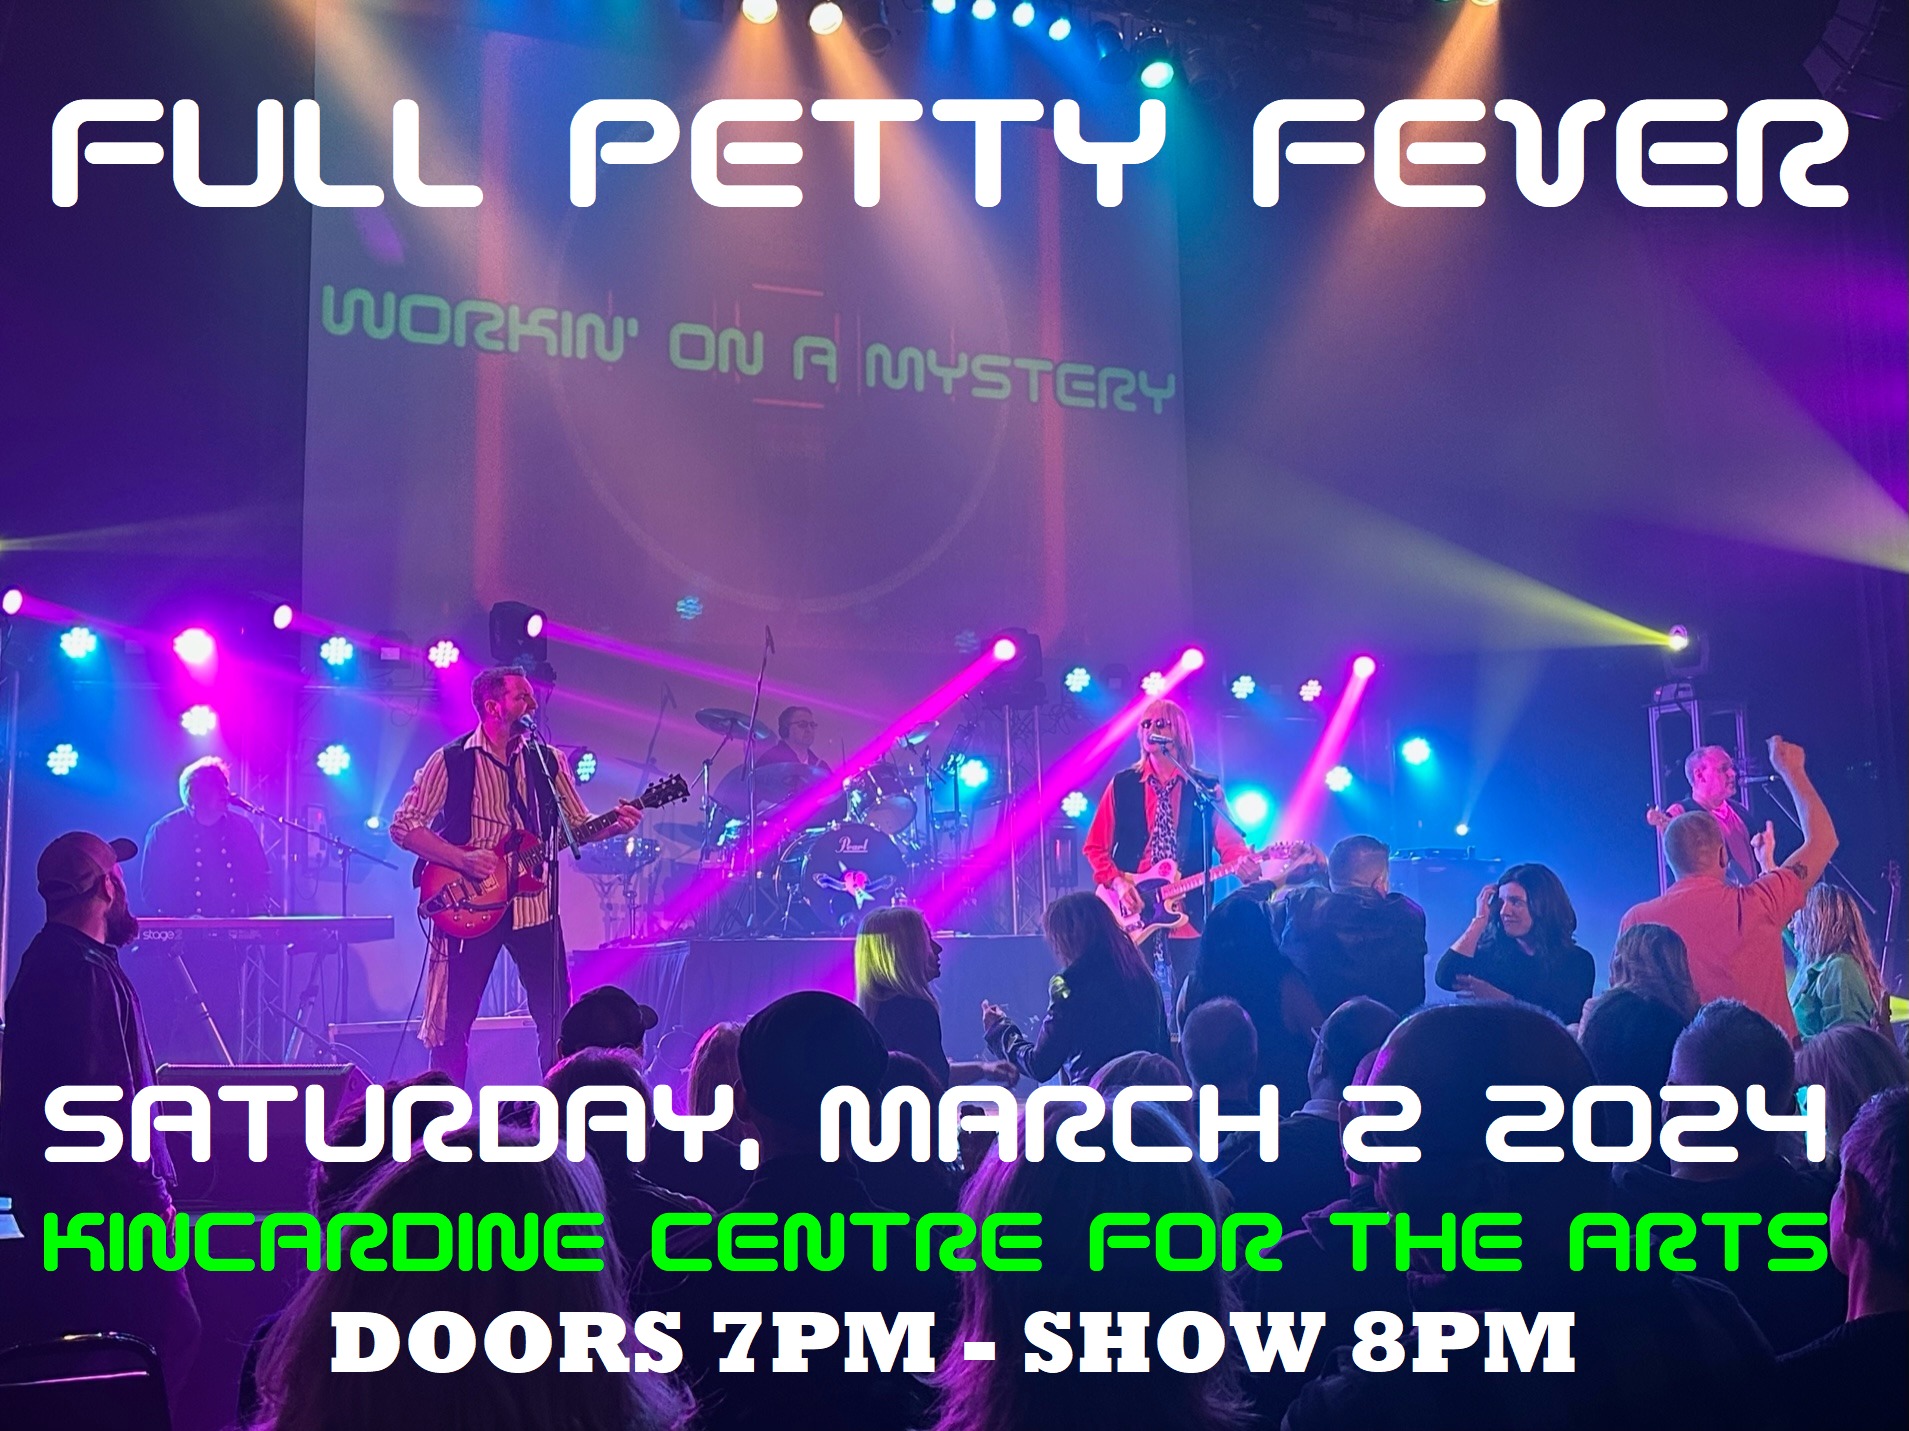 Full Petty Fever Takes the Stage at Kincardine Centre for Performing Arts on March 2nd!